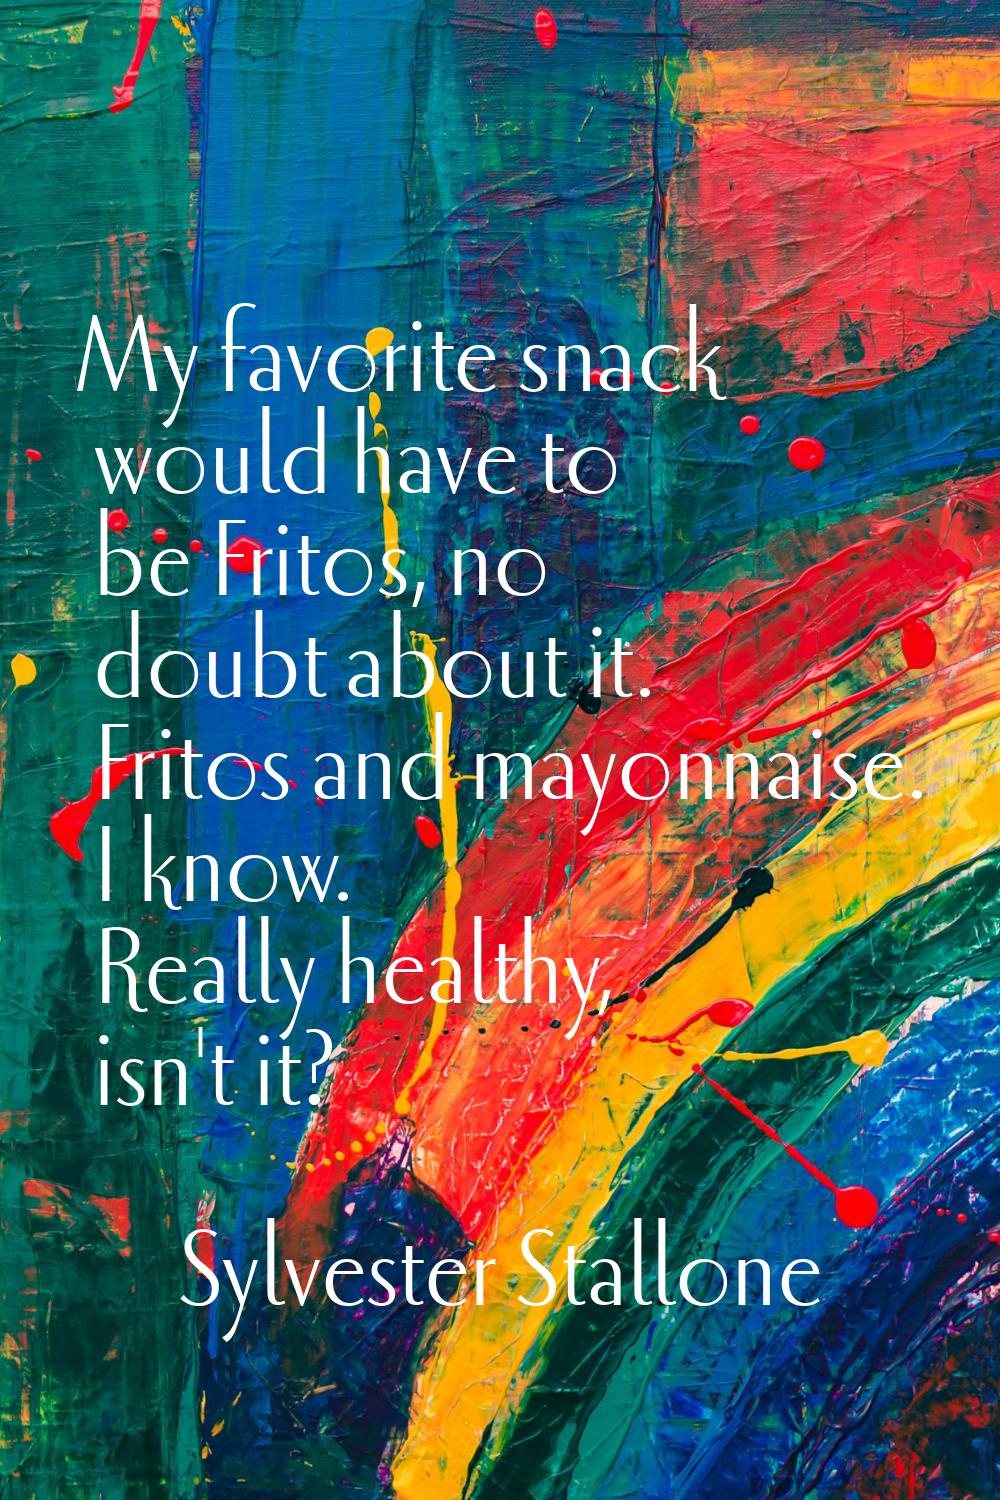 My favorite snack would have to be Fritos, no doubt about it. Fritos and mayonnaise. I know. Really